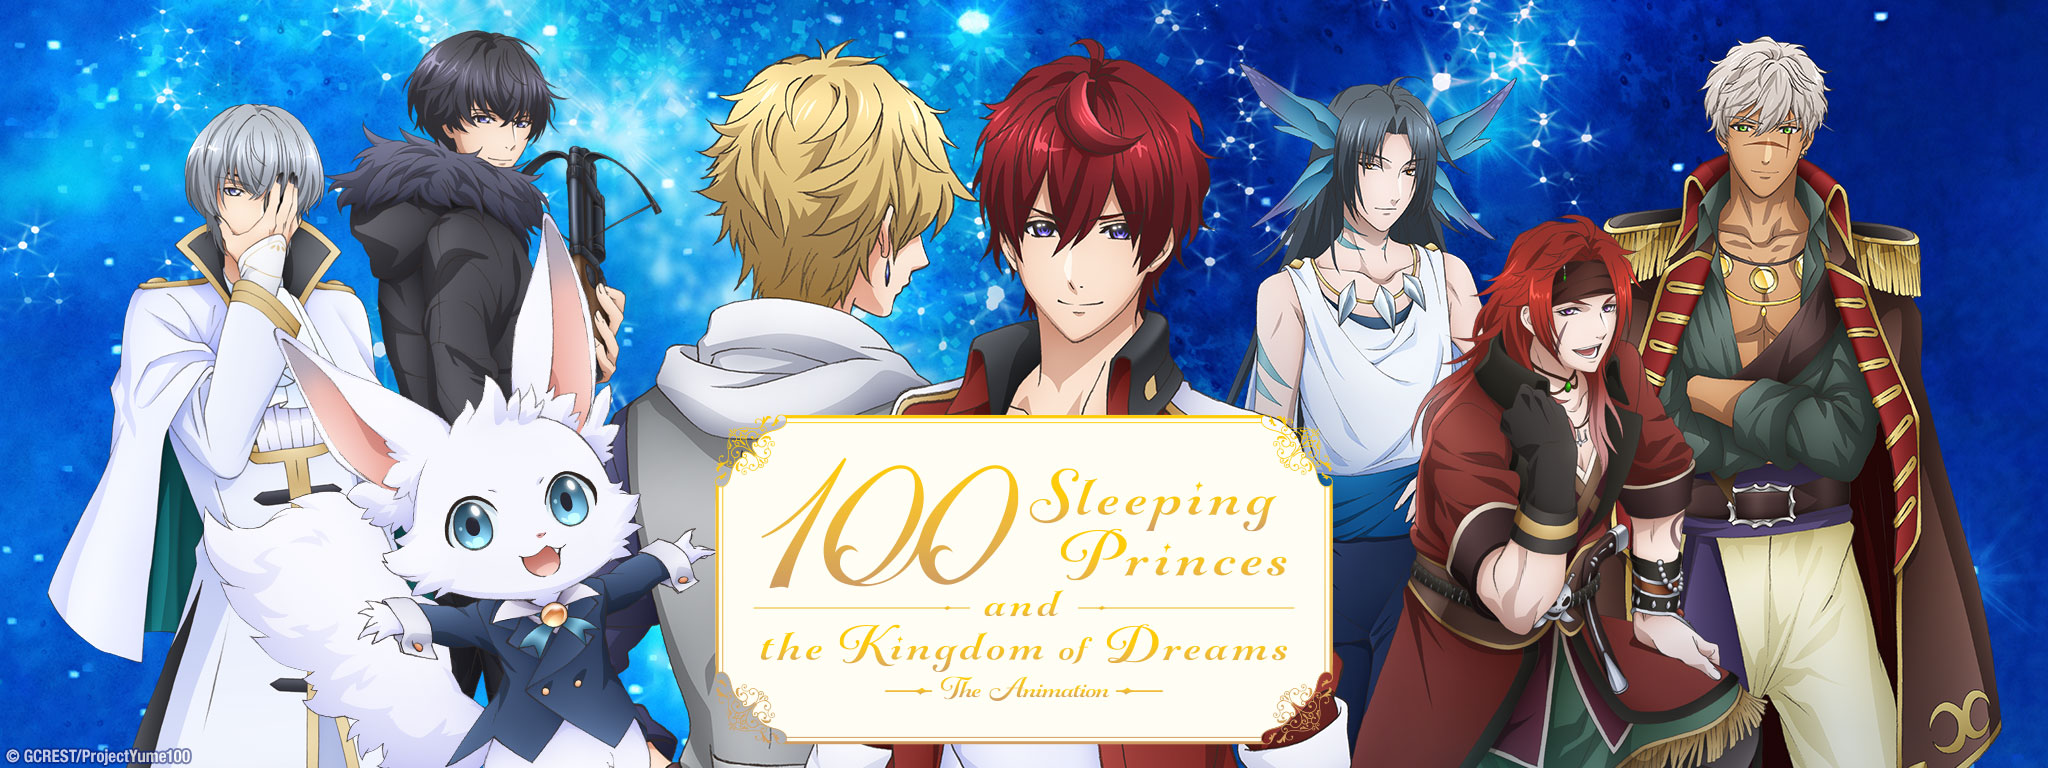 Title Art for 100 Sleeping Princes & the Kingdom of Dreams